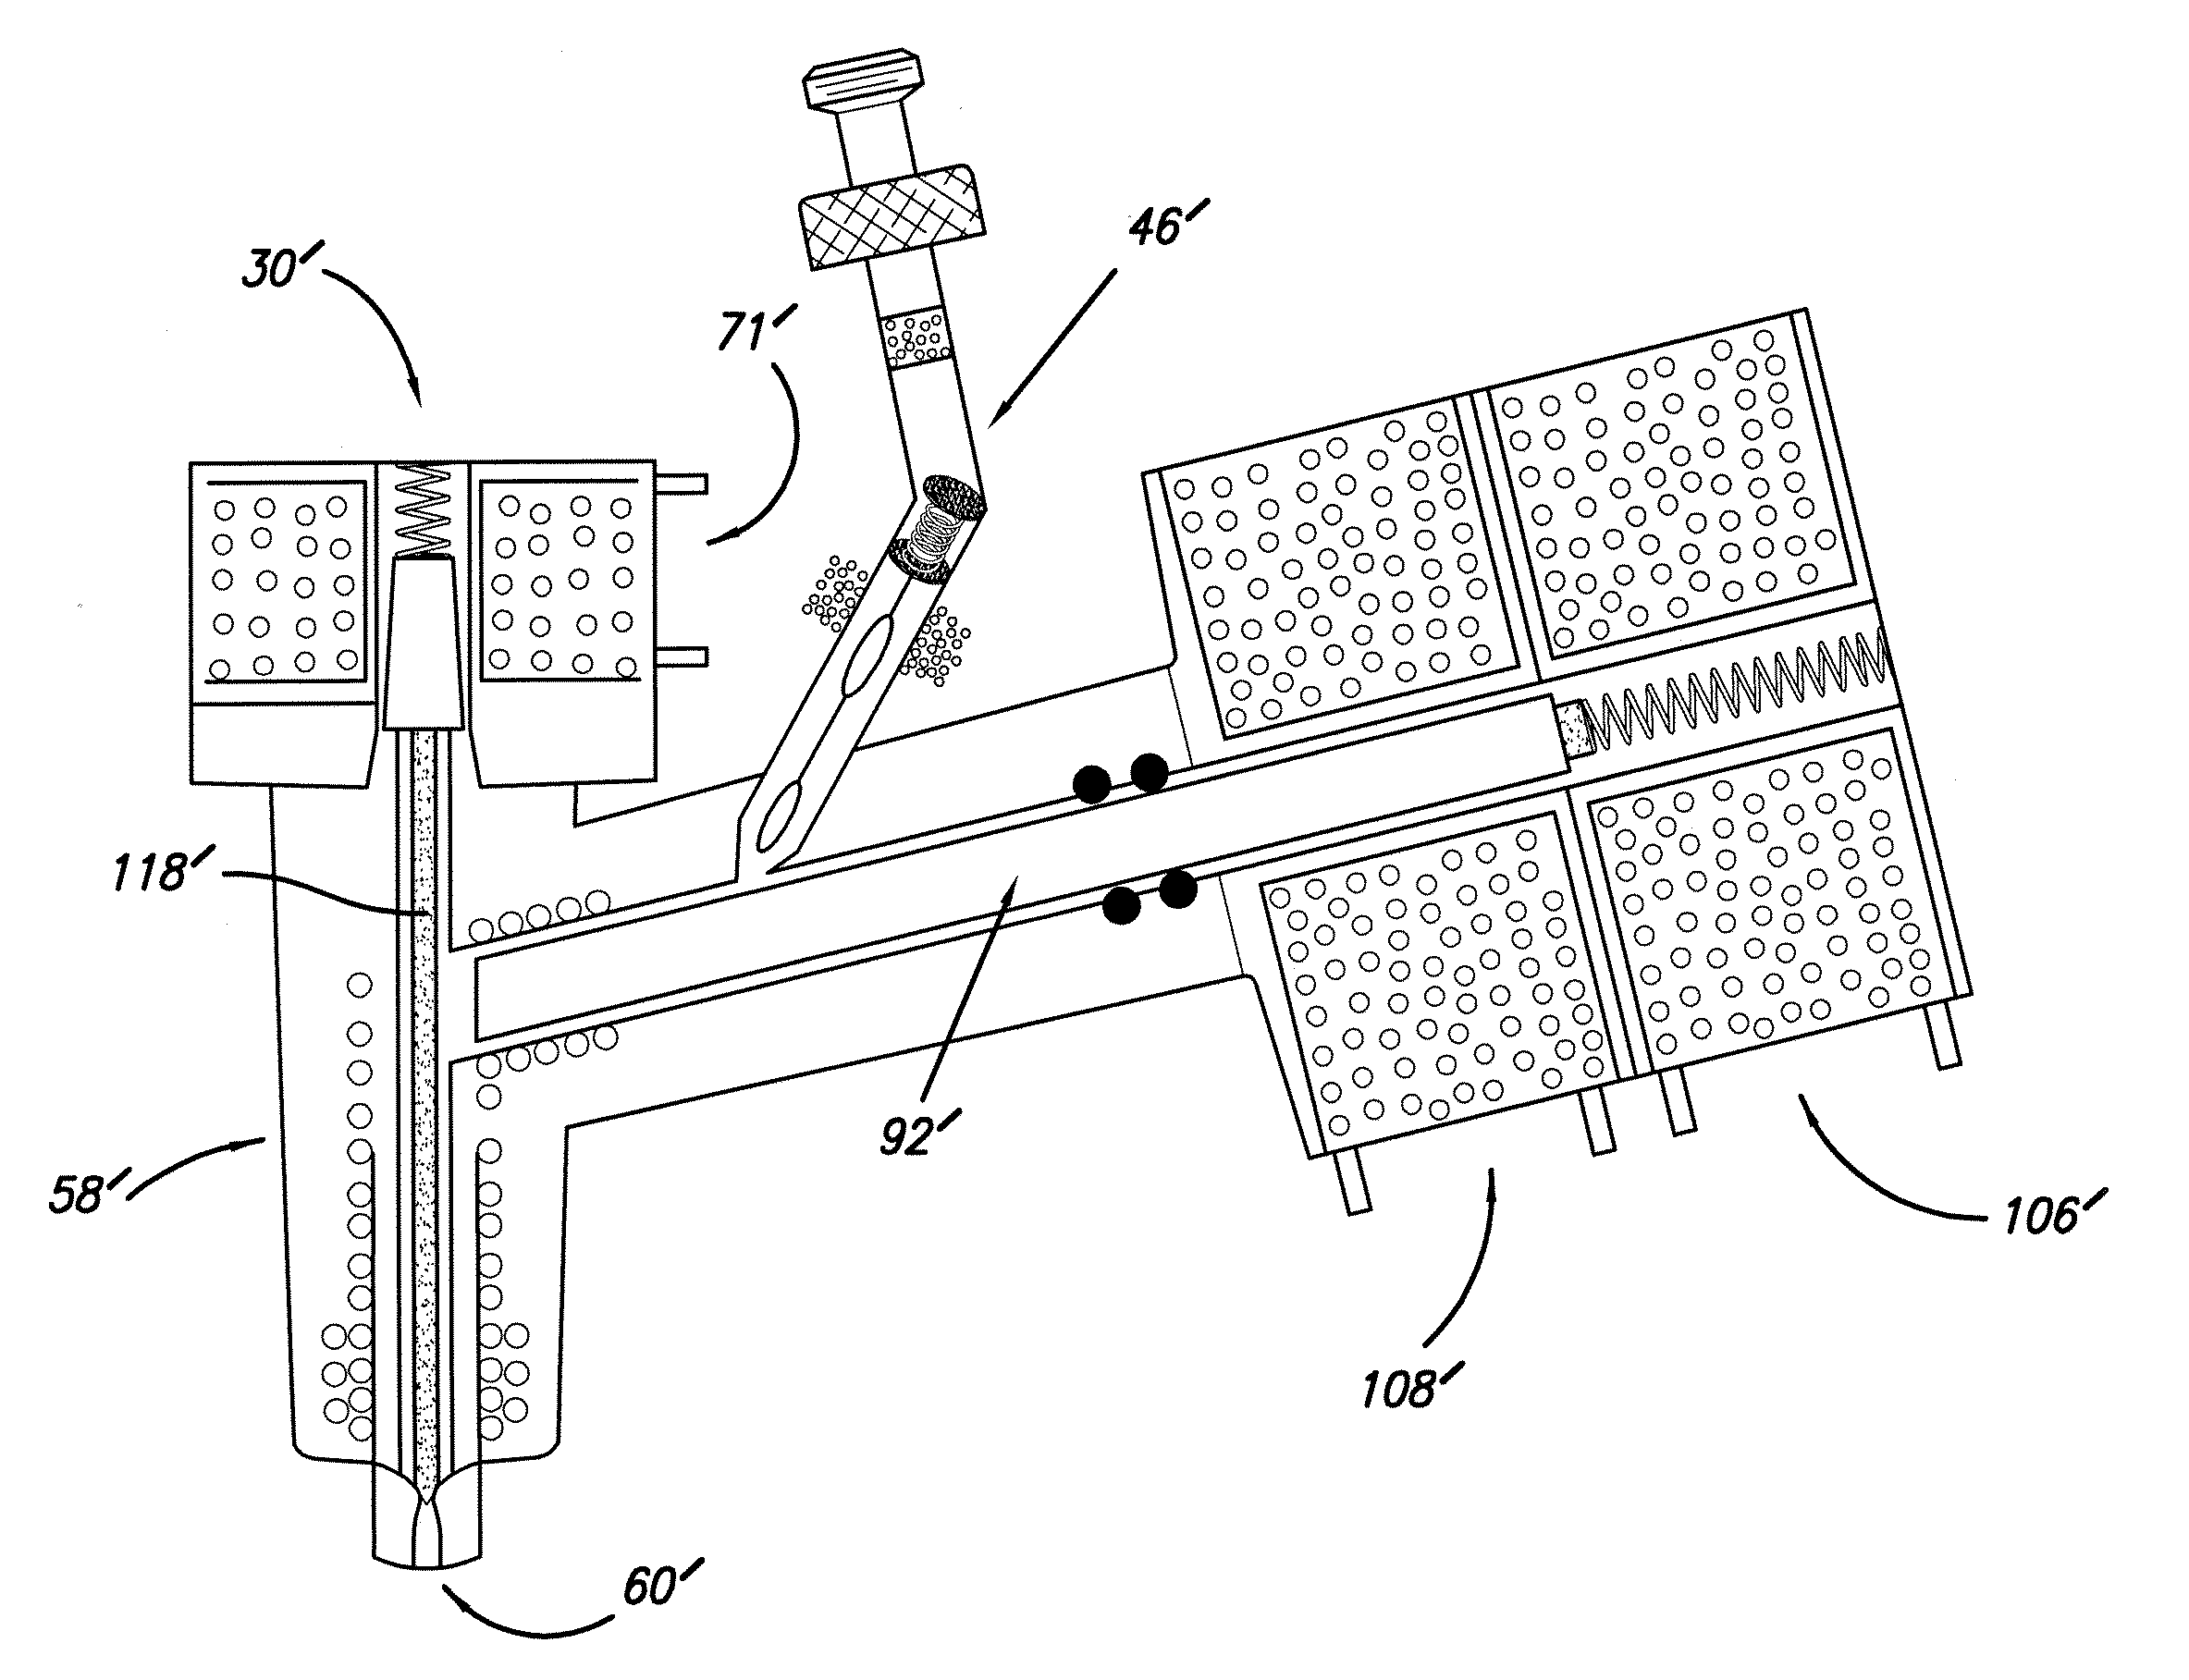 Heated catalyzed fuel injector for injection ignition engines